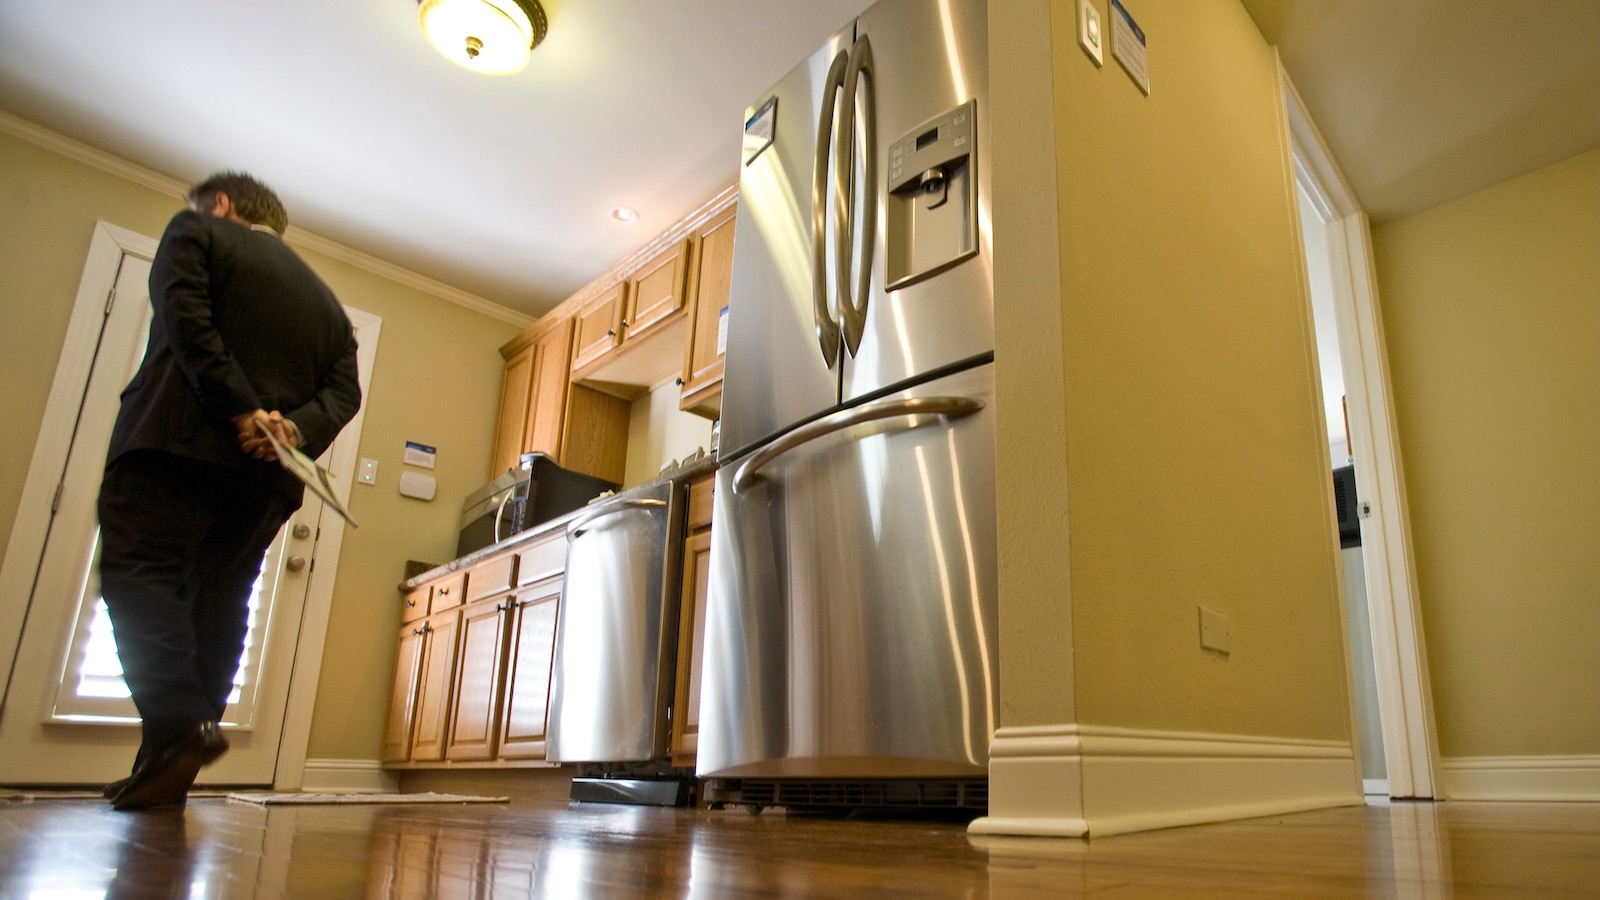 A woman walks through a kitchen with an electric refrigerator and stove.